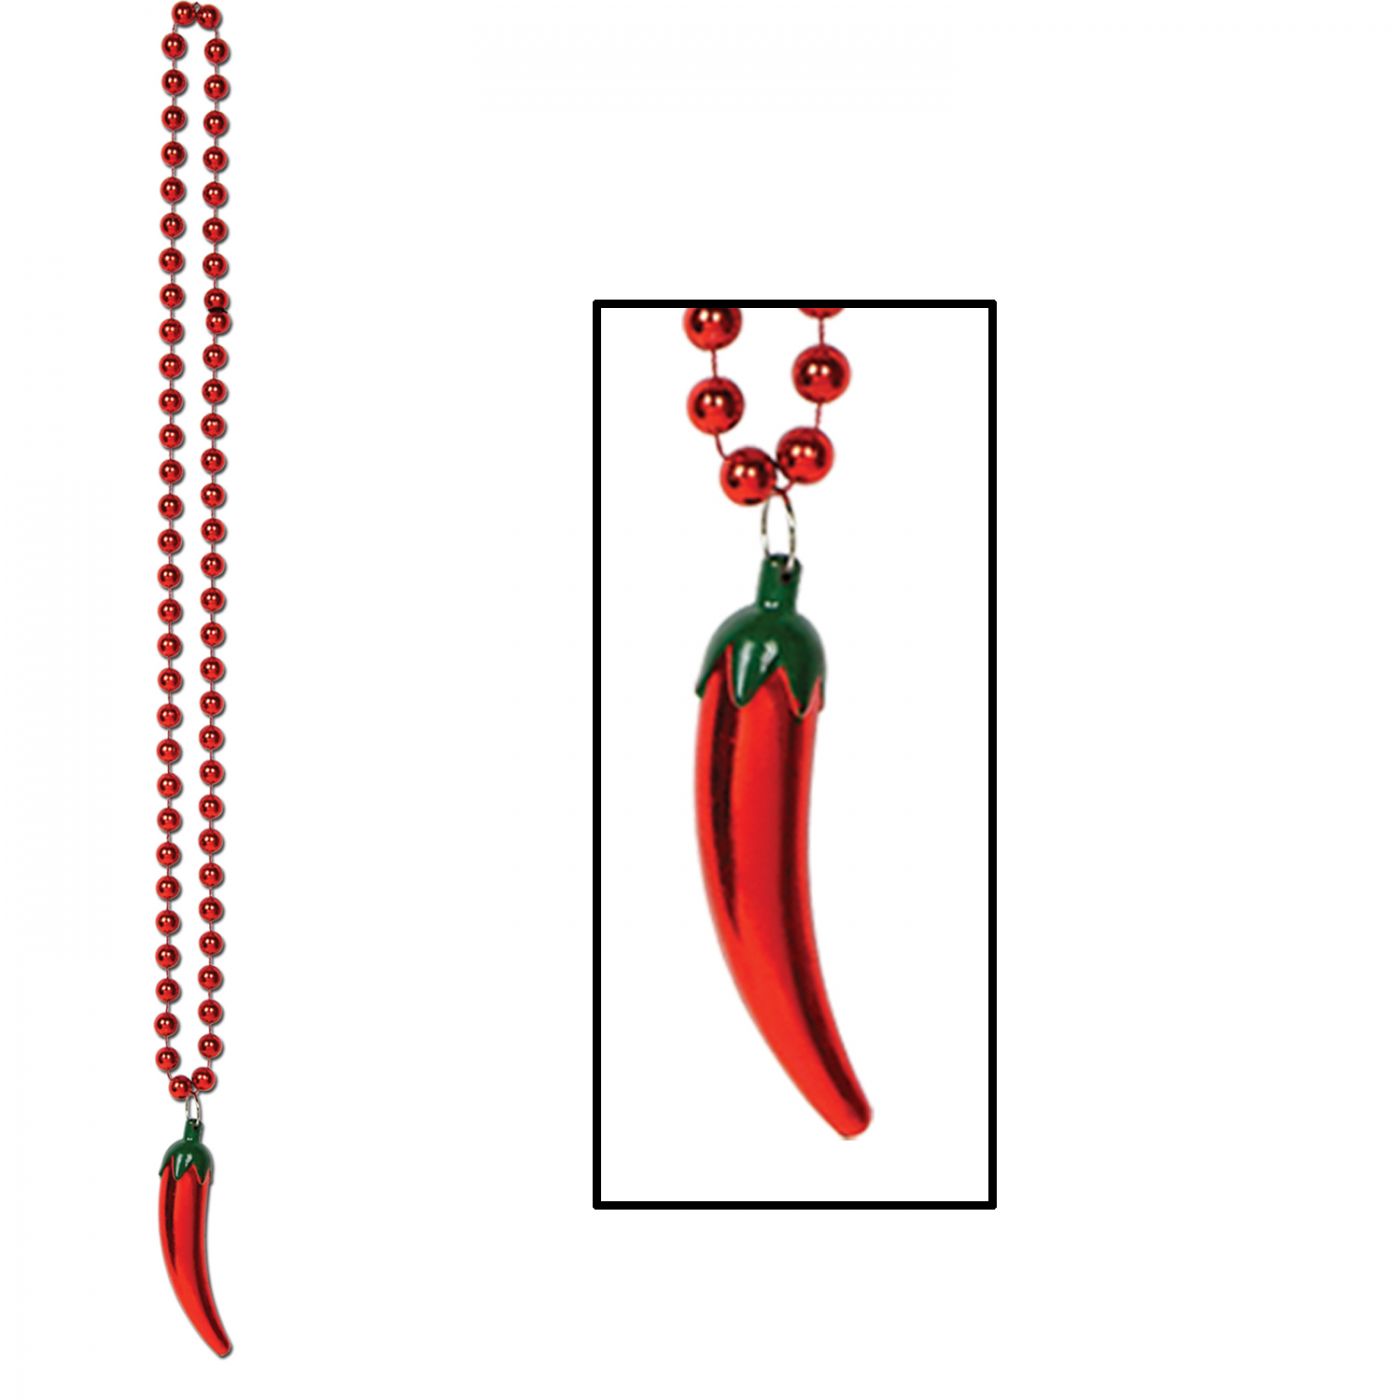 Image of Beads w/Chili Pepper Medallion (12)